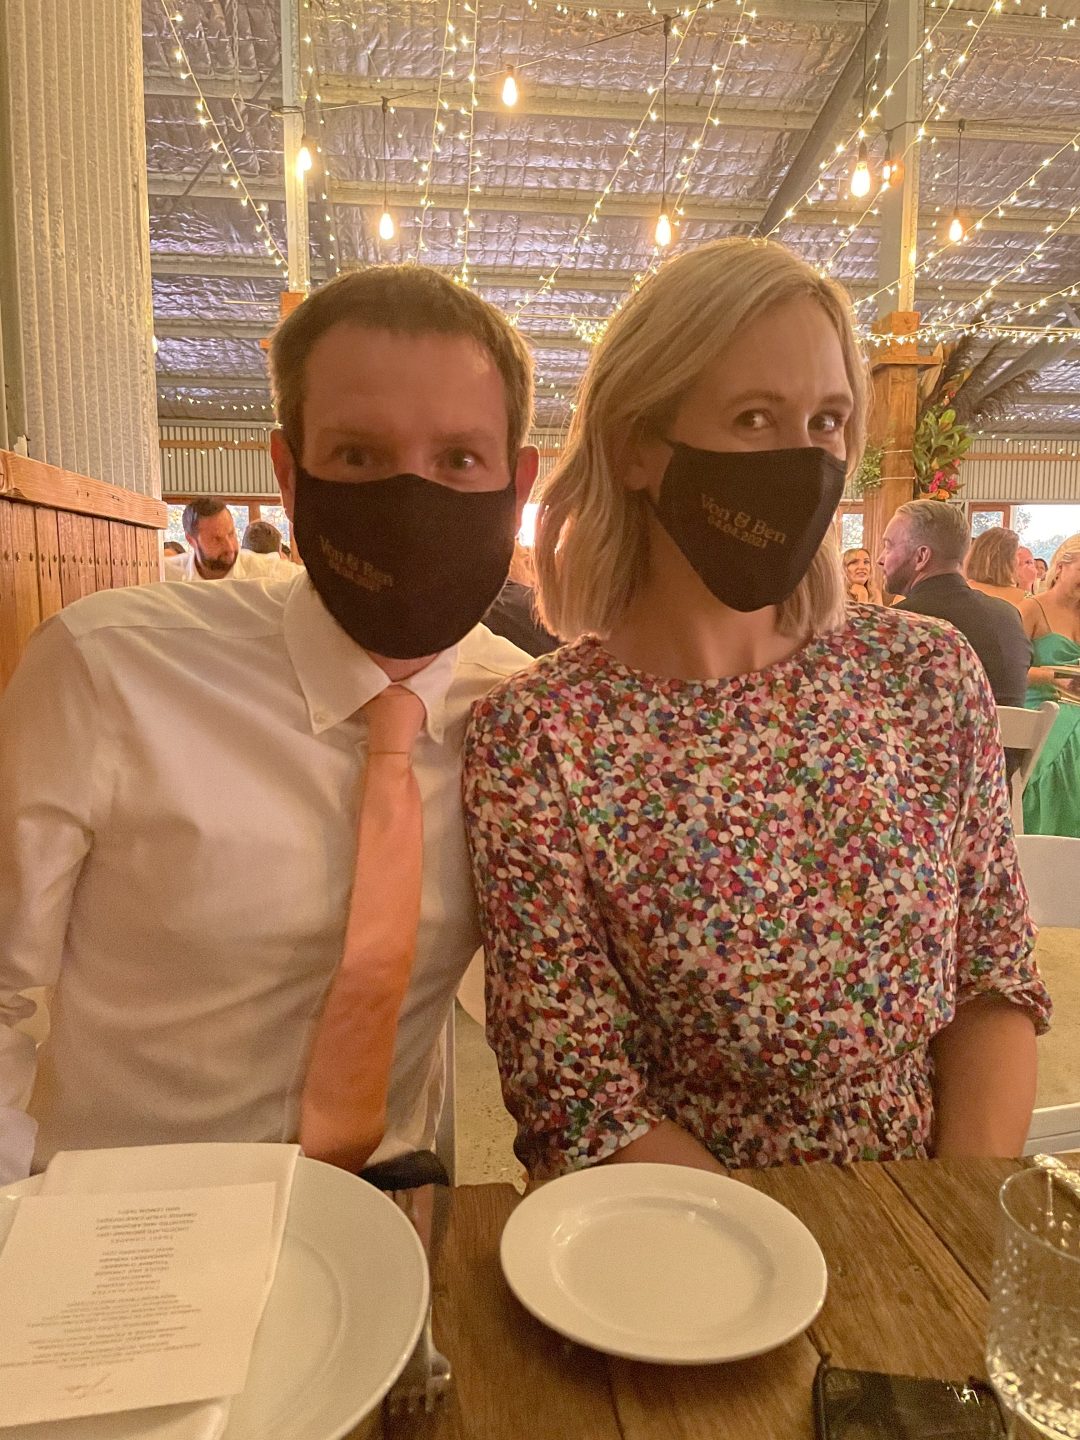 a couple at a wedding with black face masks on.